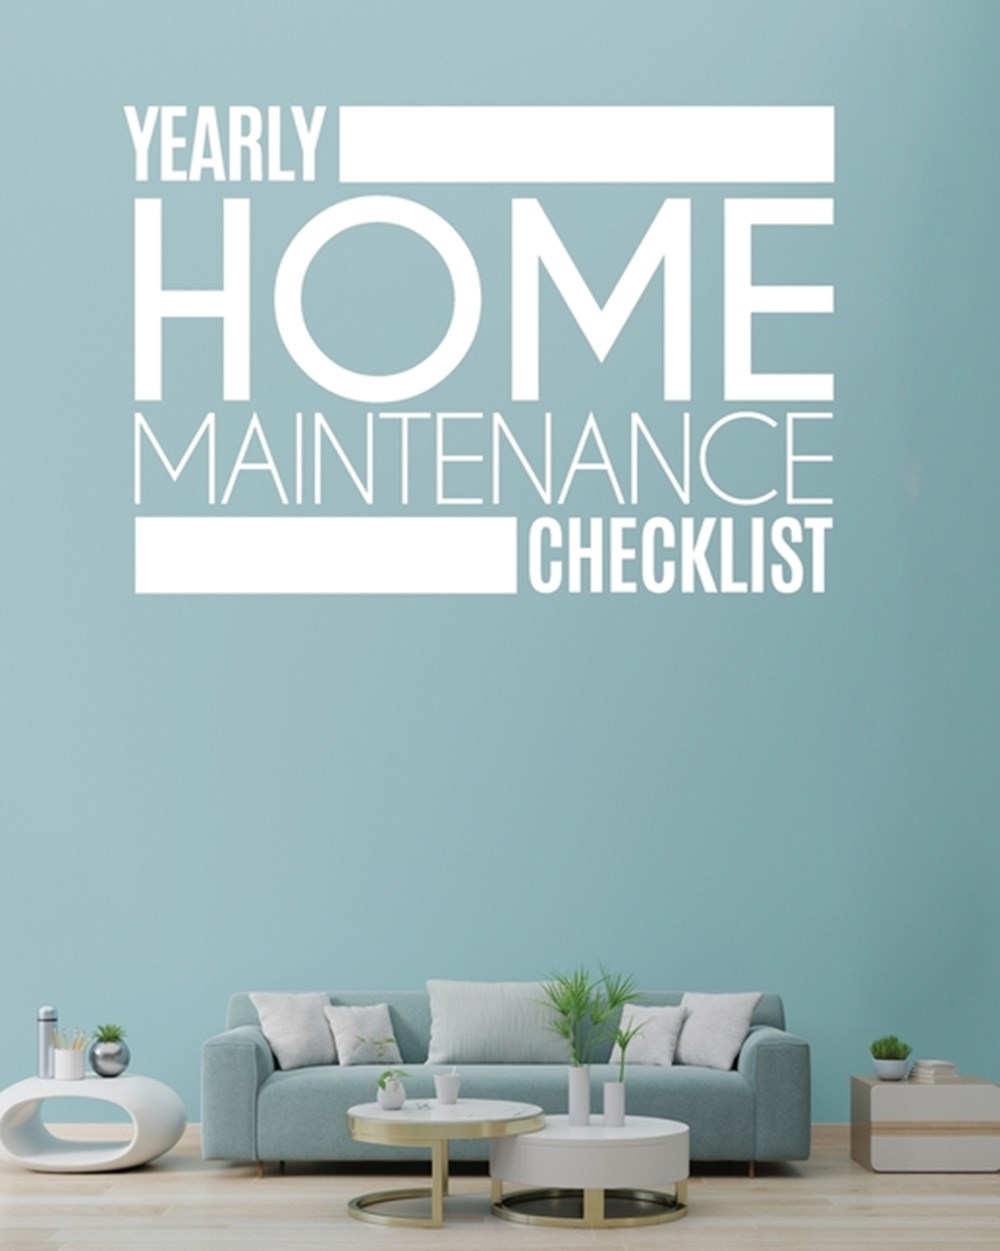 Yearly Home Maintenance Check List: Yearly Home Maintenance For Homeowners Investors HVAC Yard Inven